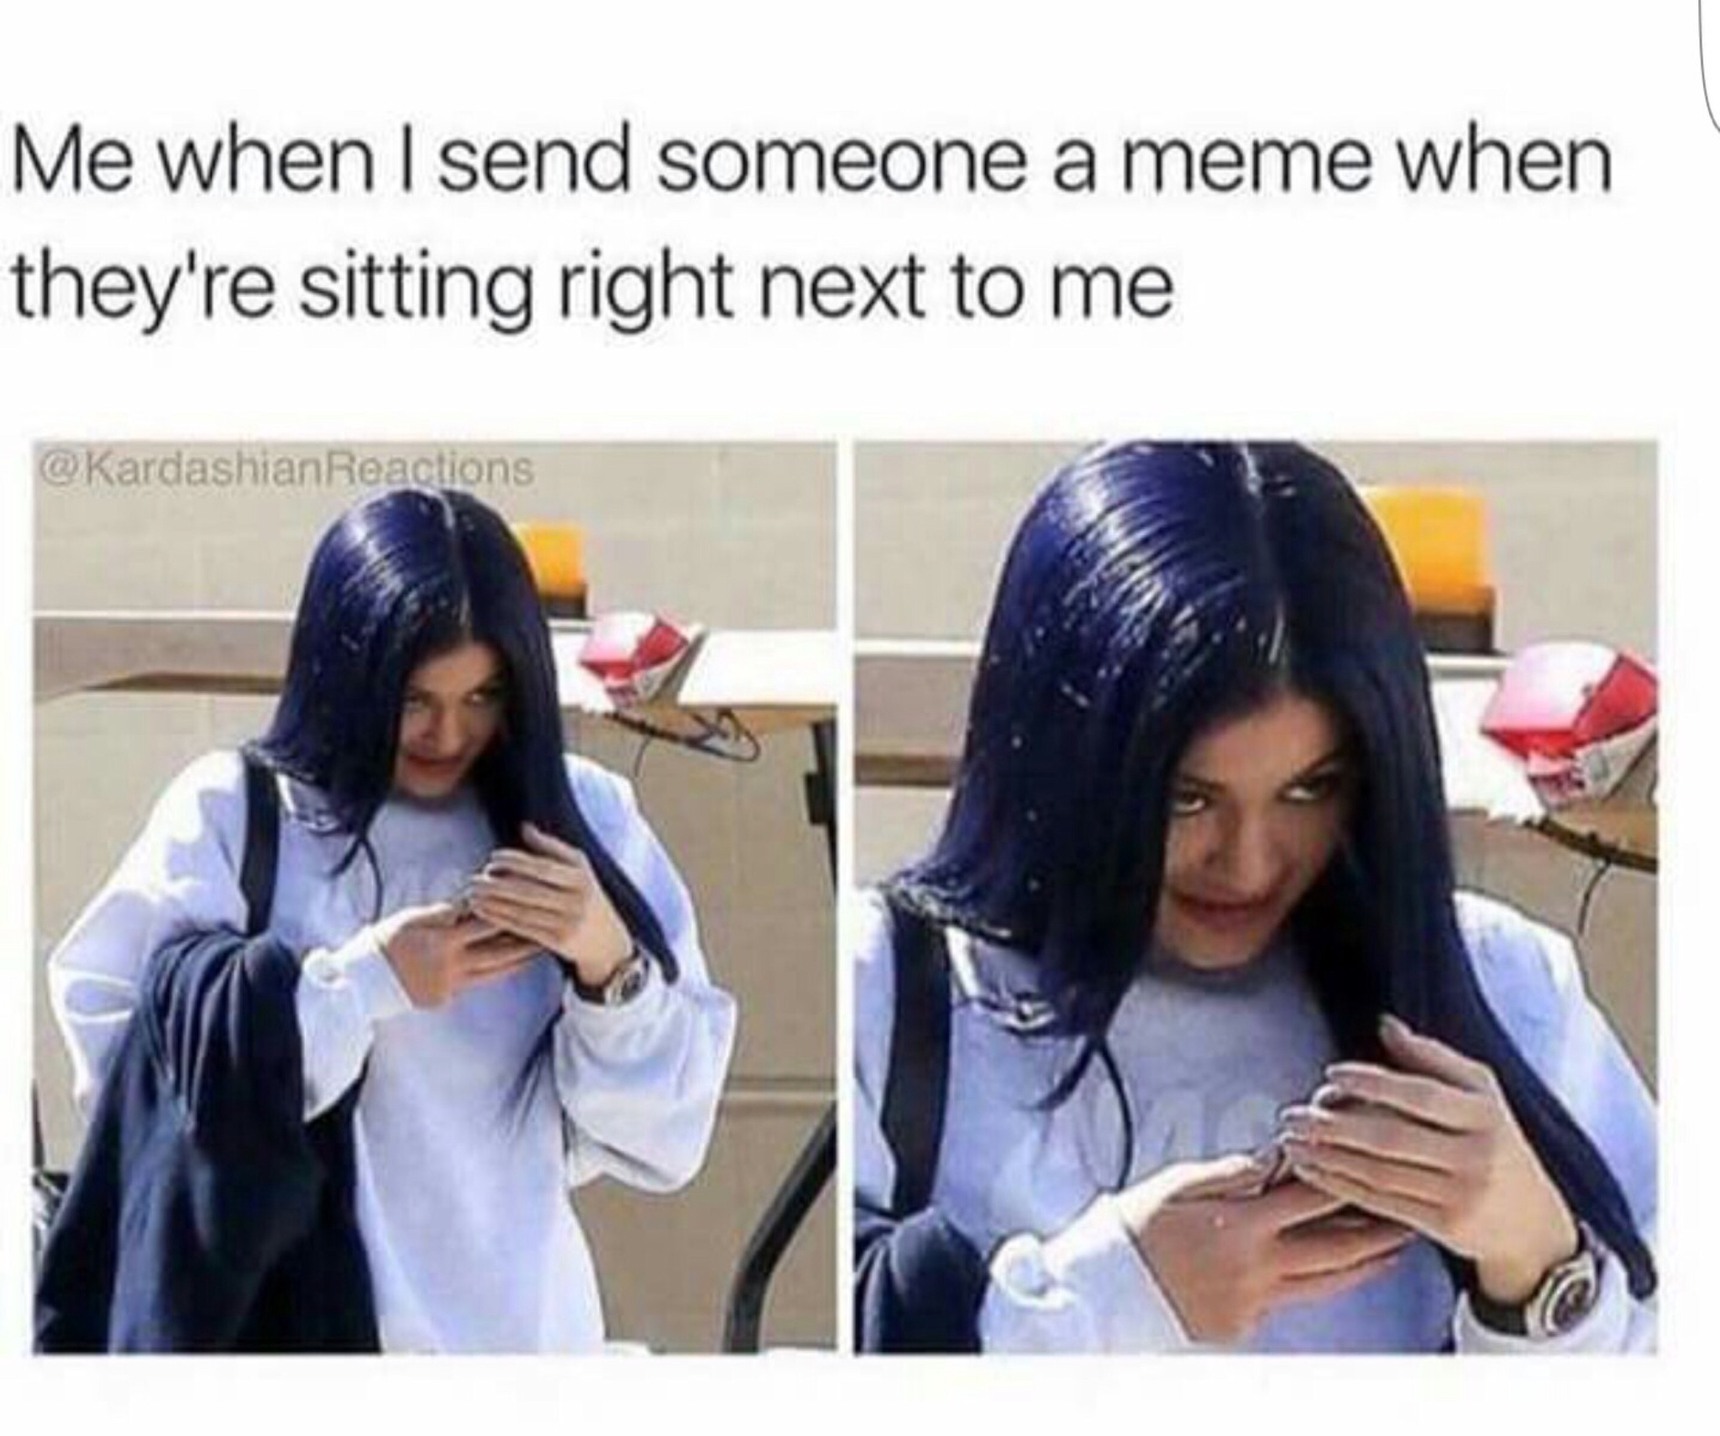 I've done this many times - meme